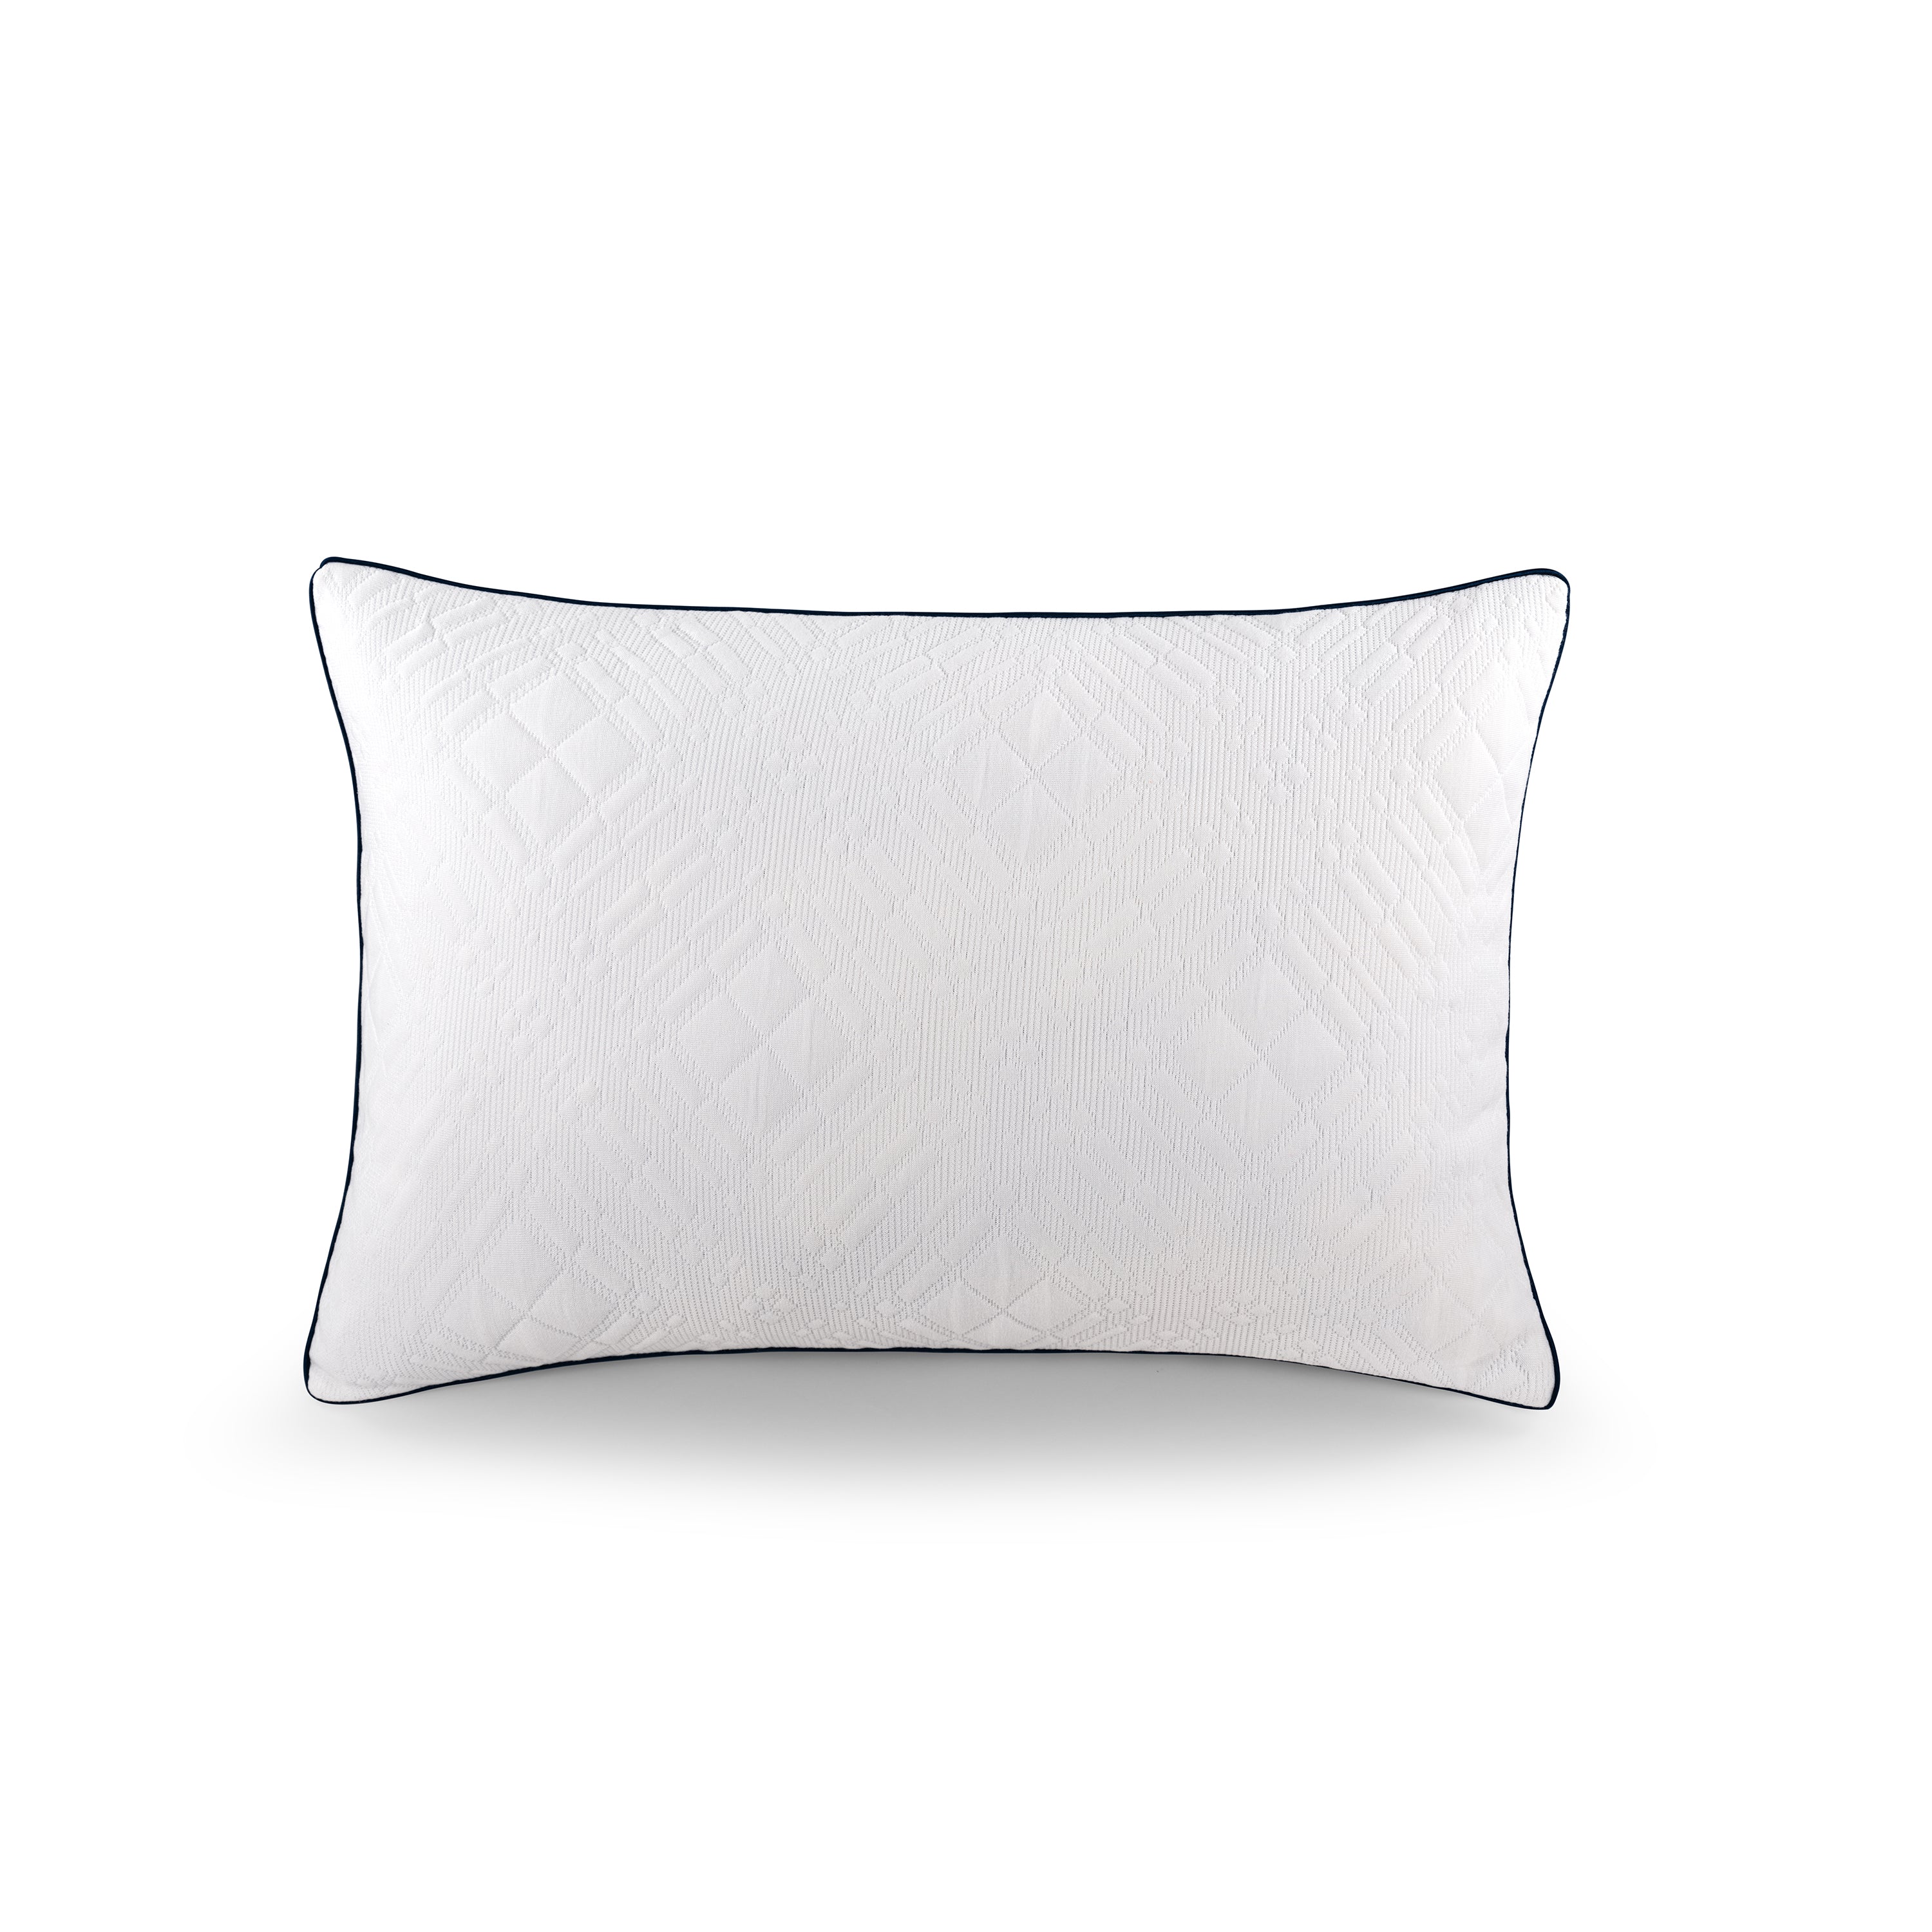 Awake Refreshed Down Alternative Pillows | 2-Pack